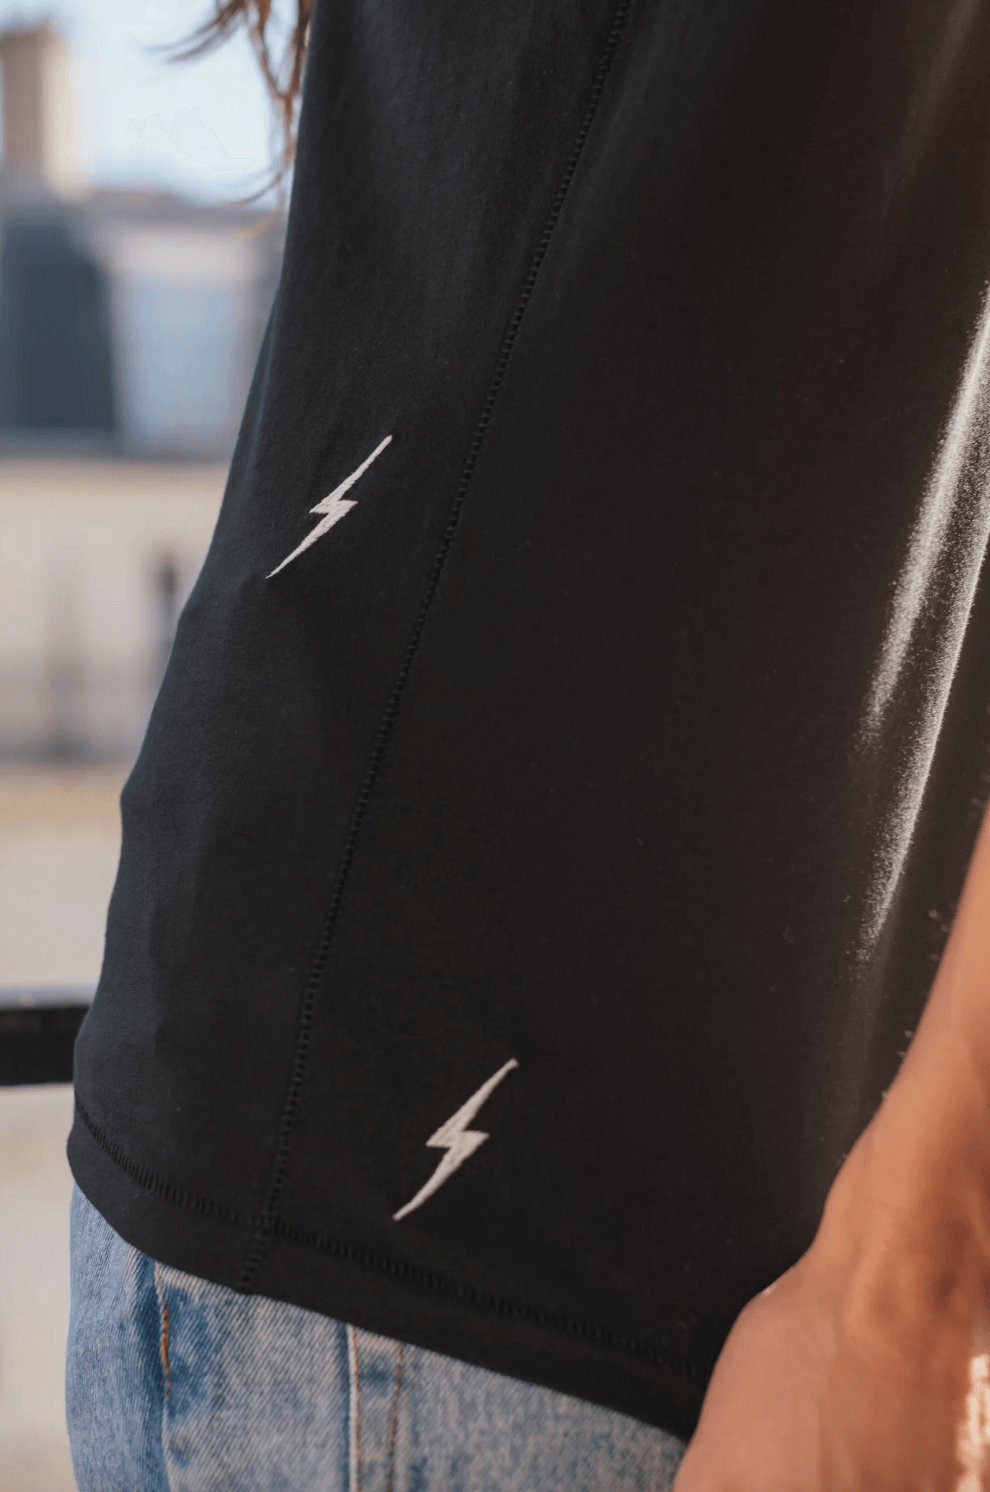 Embroidered Lightning Tee by Catherine Gee - Haven